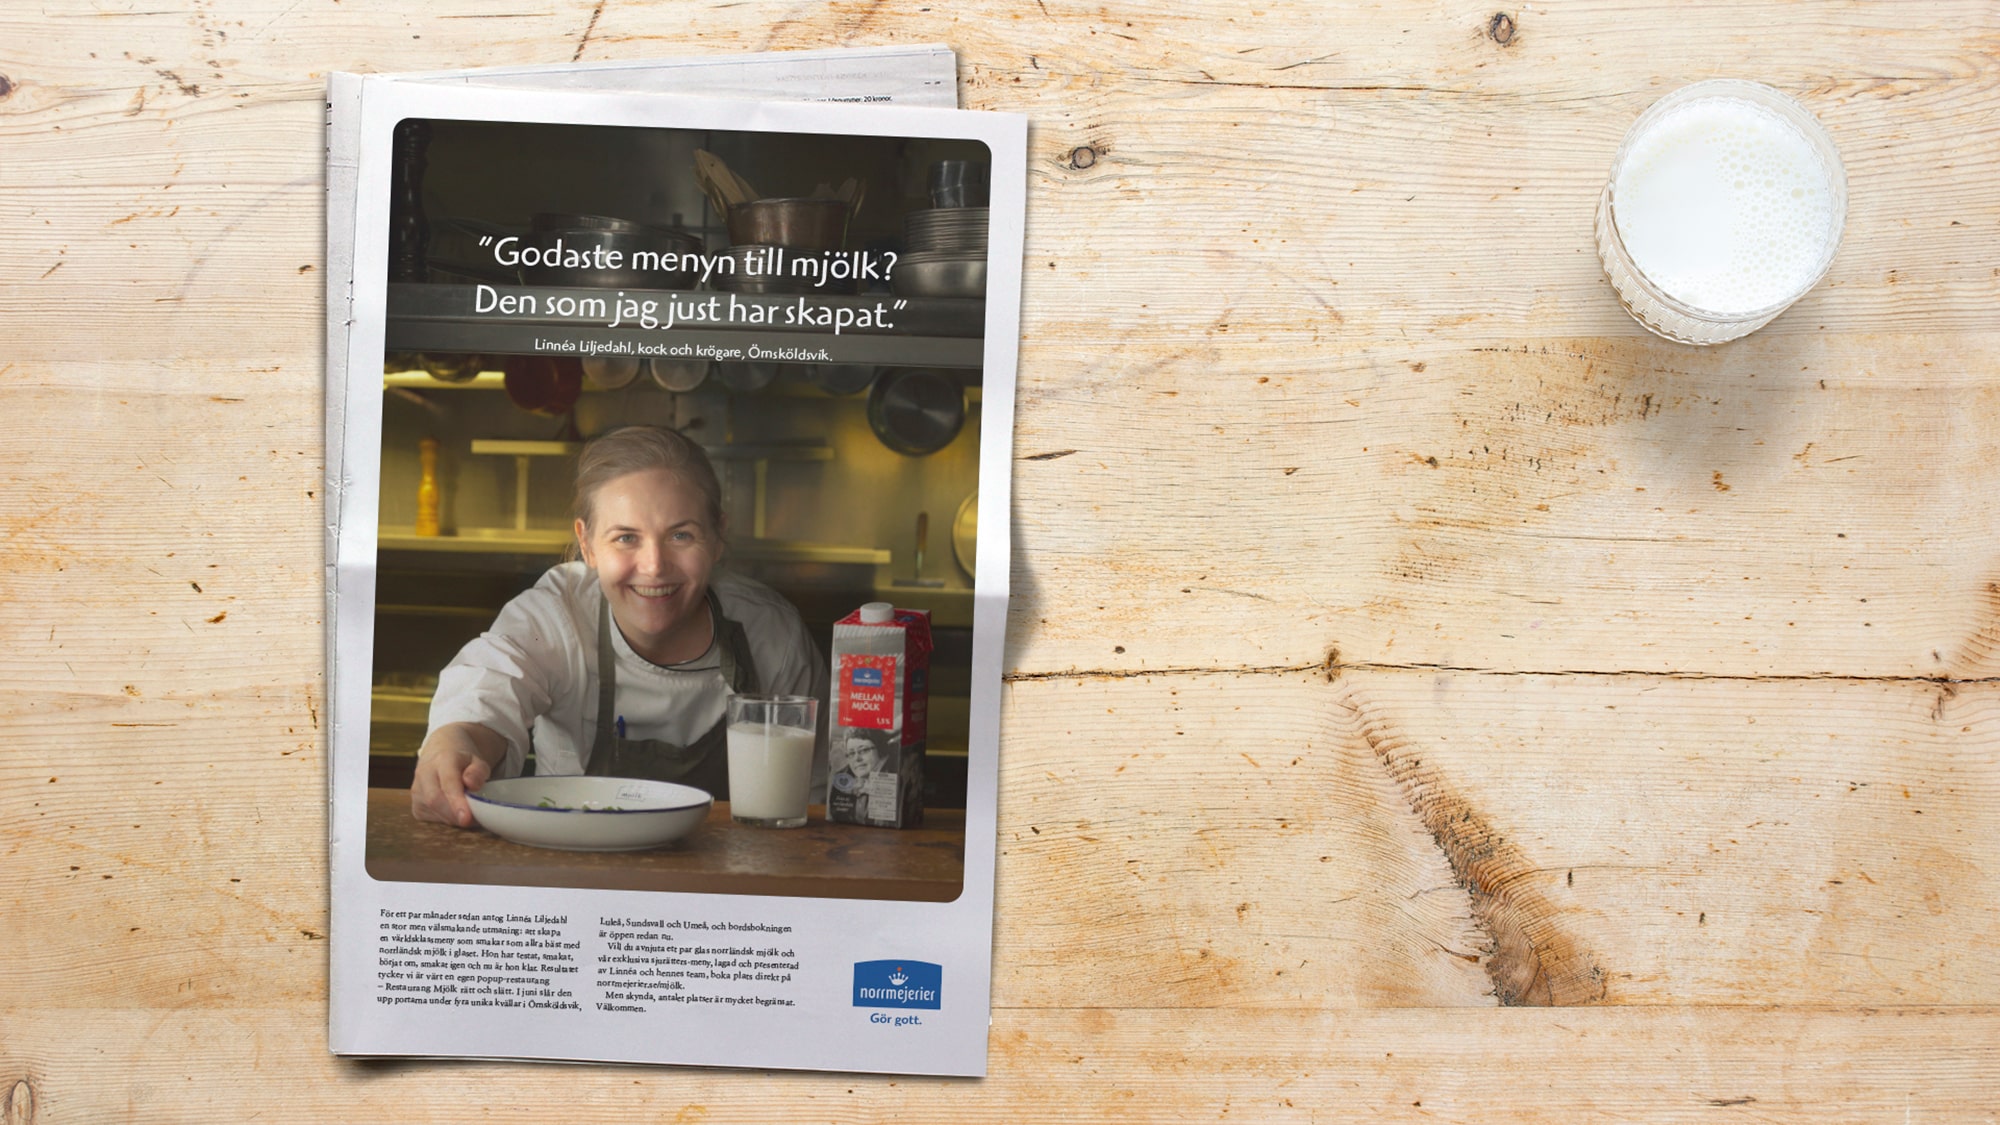 Newspaper with an ad for Milk put on wooden table with glass of milk